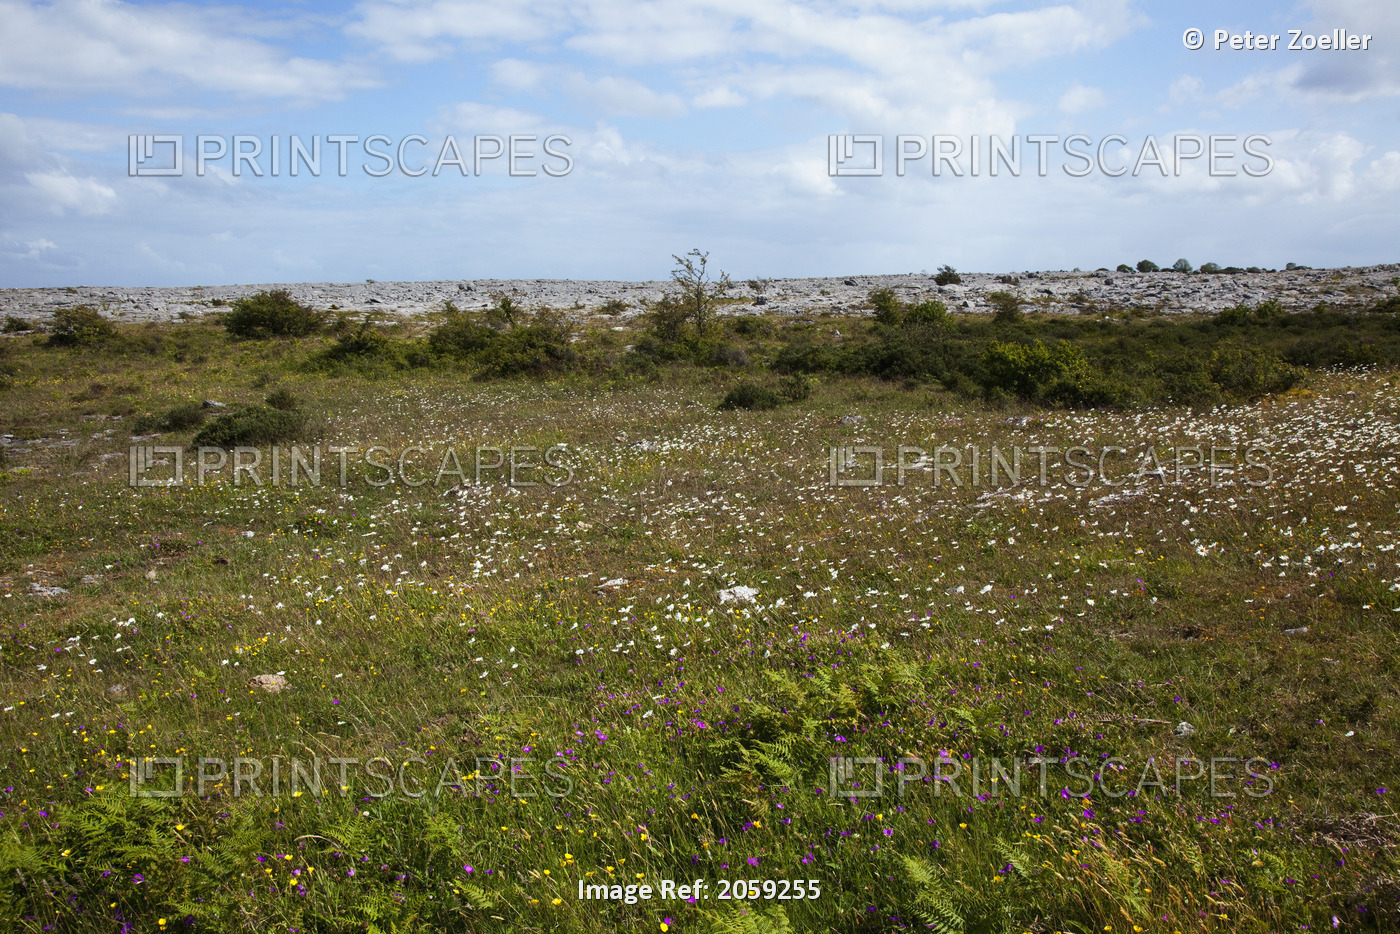 White Wildflowers Growing In A Field; The Burren, County Clare, Ireland